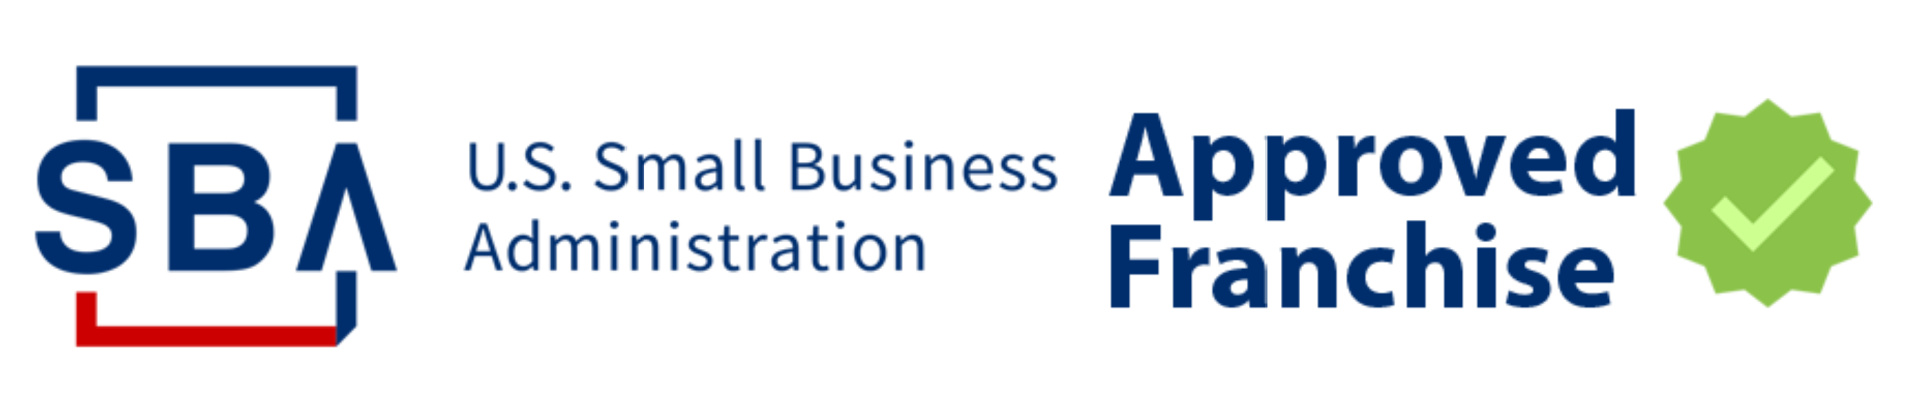 SBA Approved Franchise - Small Business Association Approved Franchise